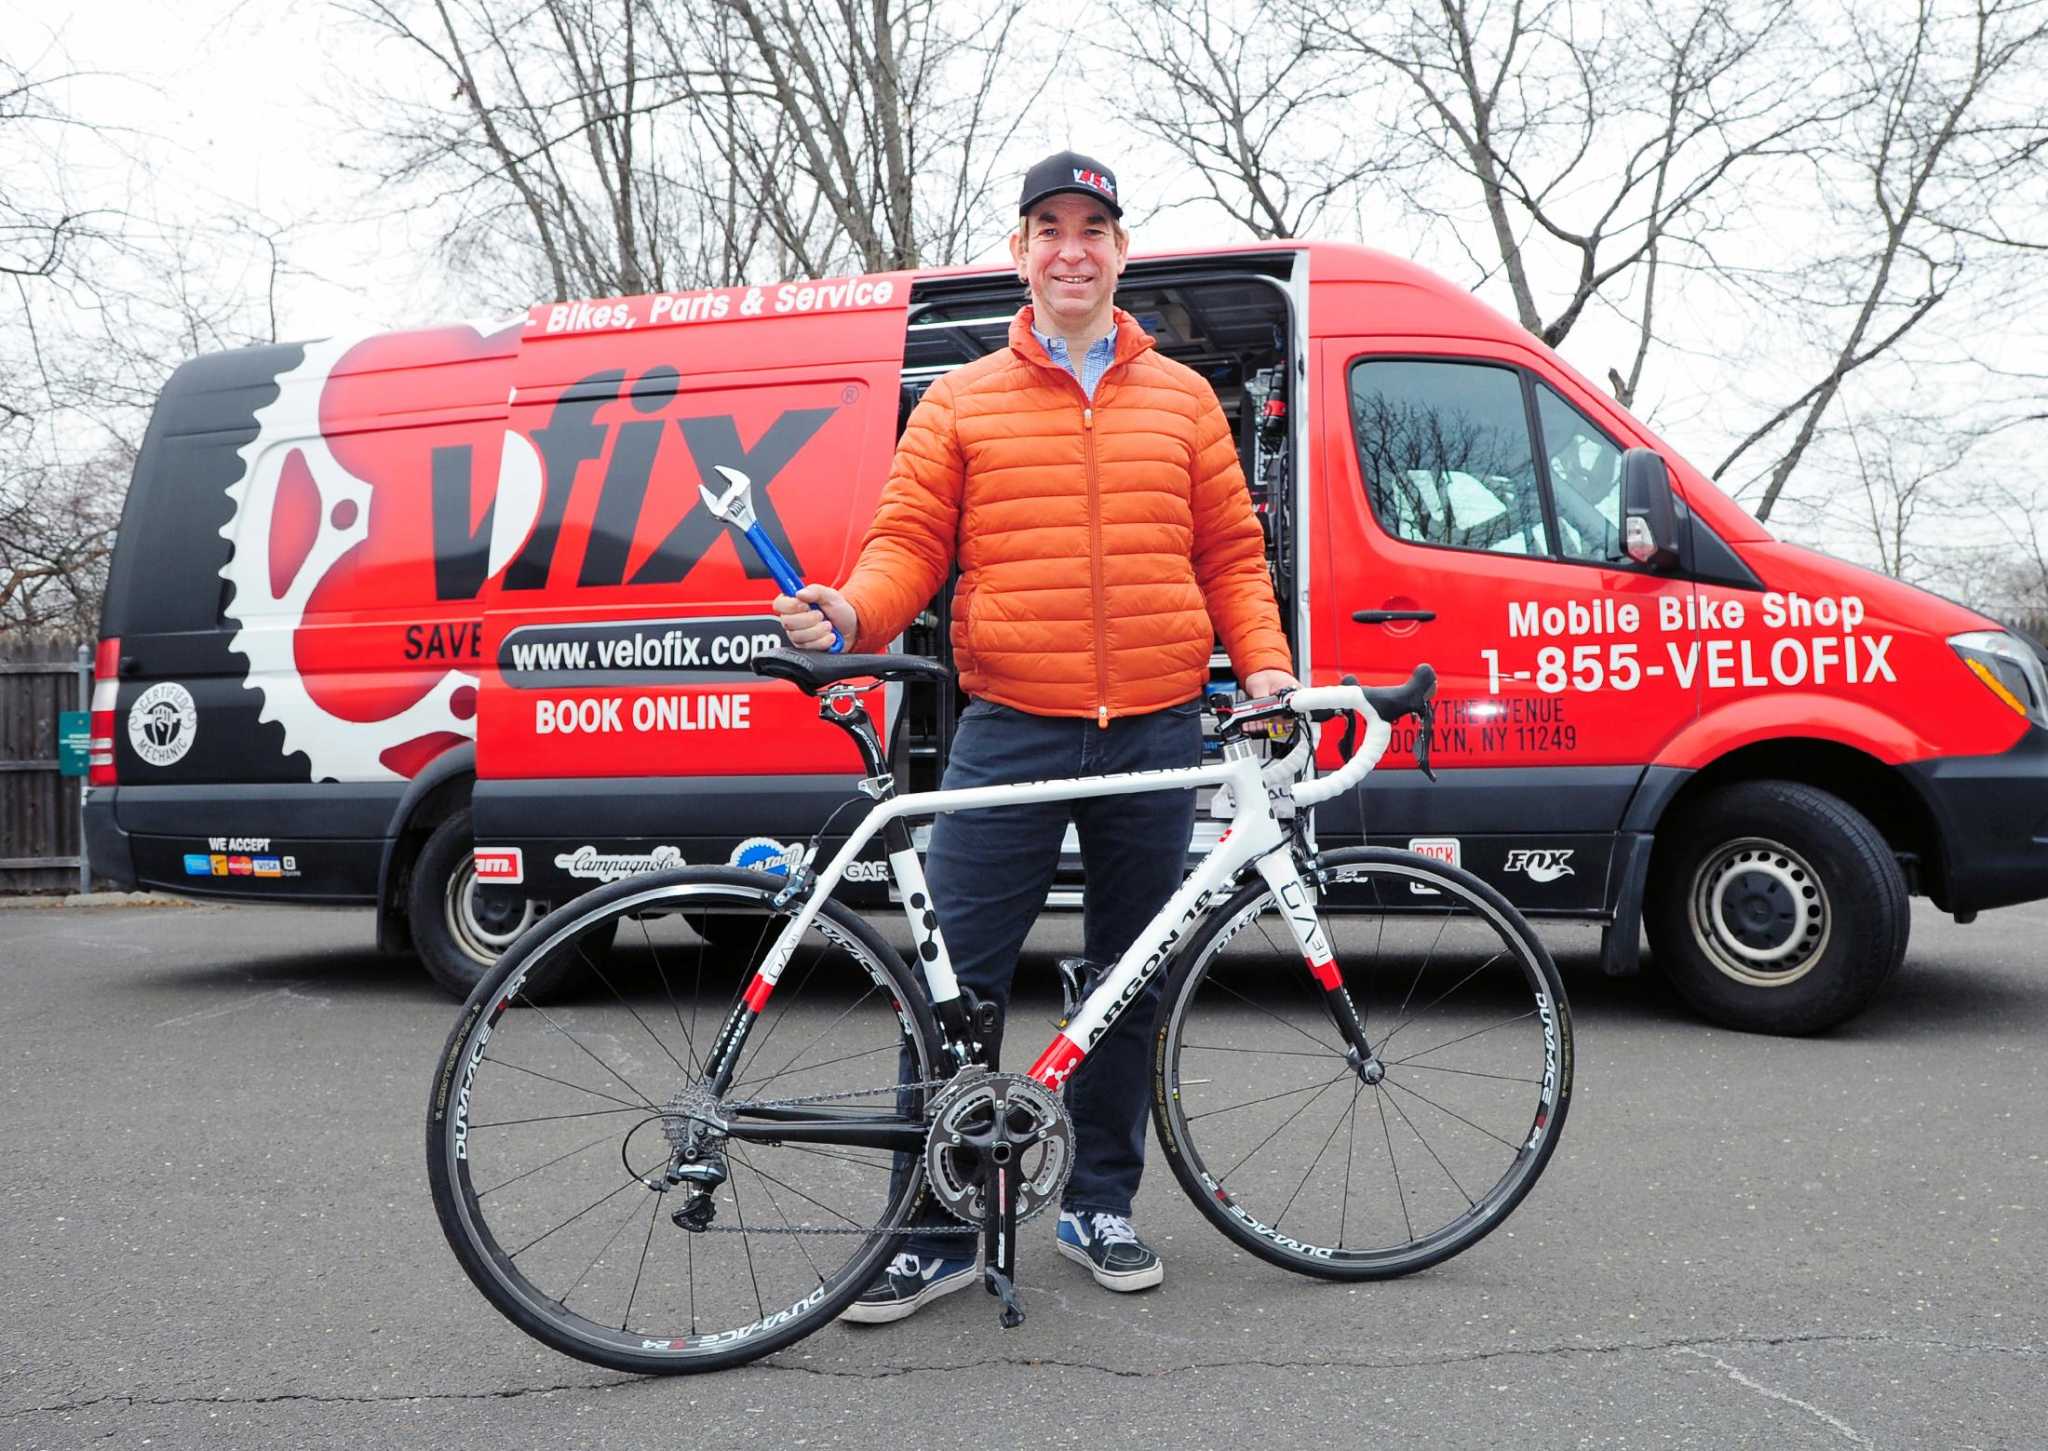 Mobile bike repair company expands to southwestern Connecticut